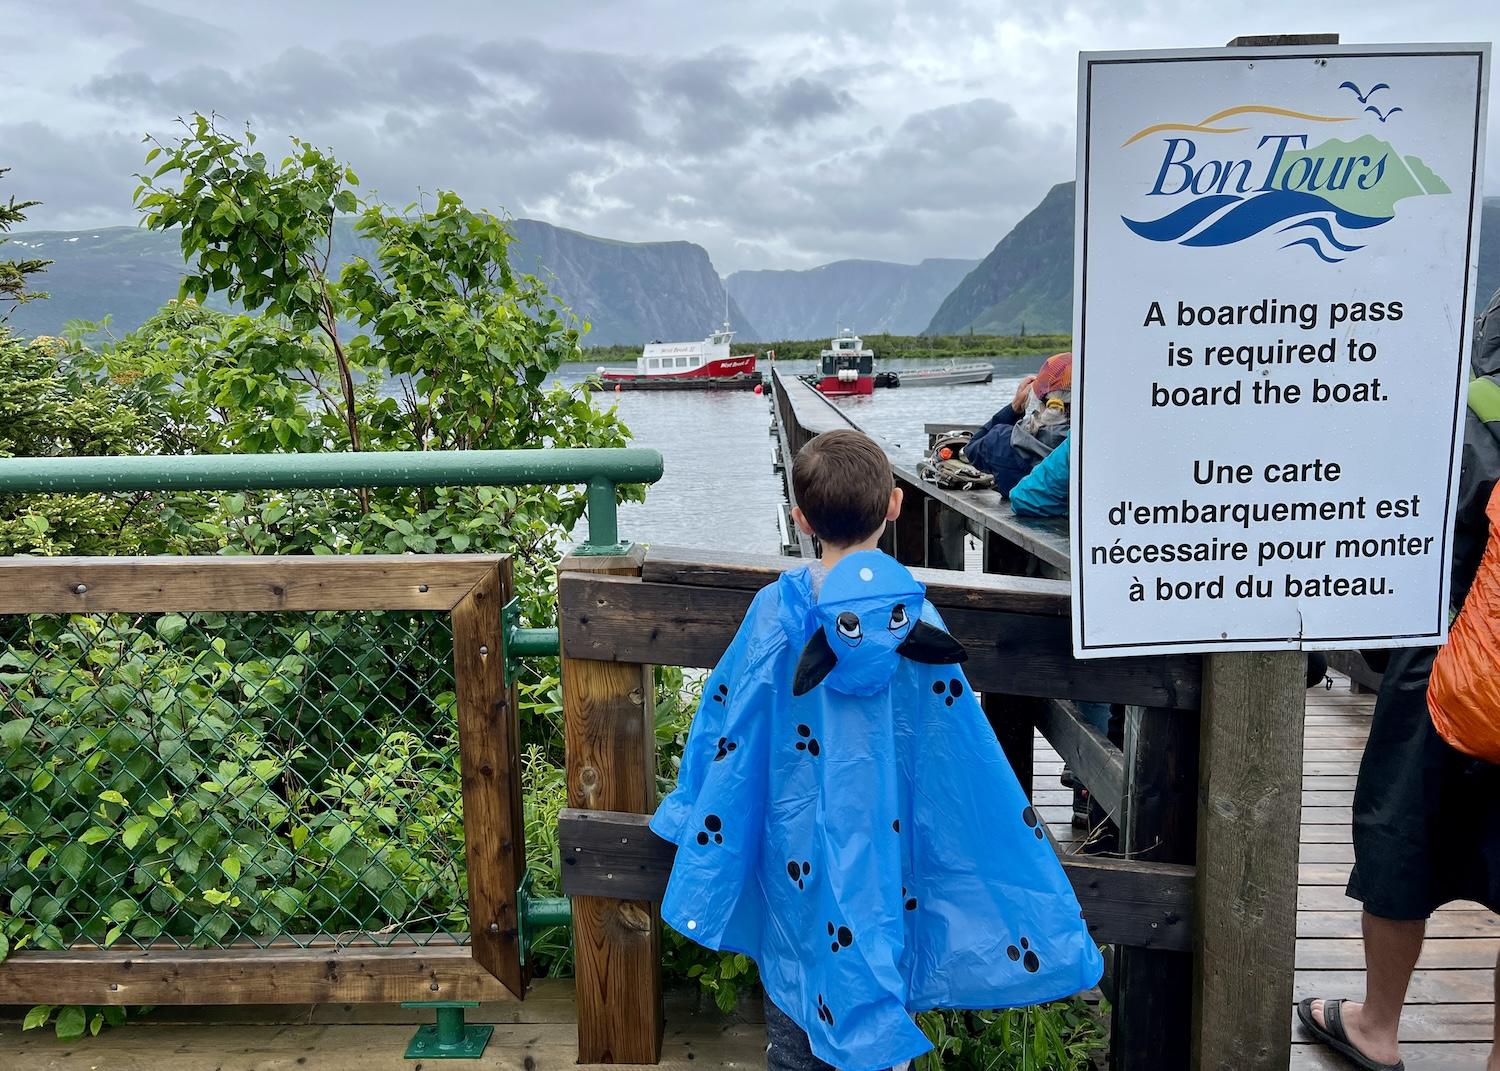 On a rainy day in July 2023, people wait for the signal to board a BonTours boat on Western Brook Pond for a guided tour.